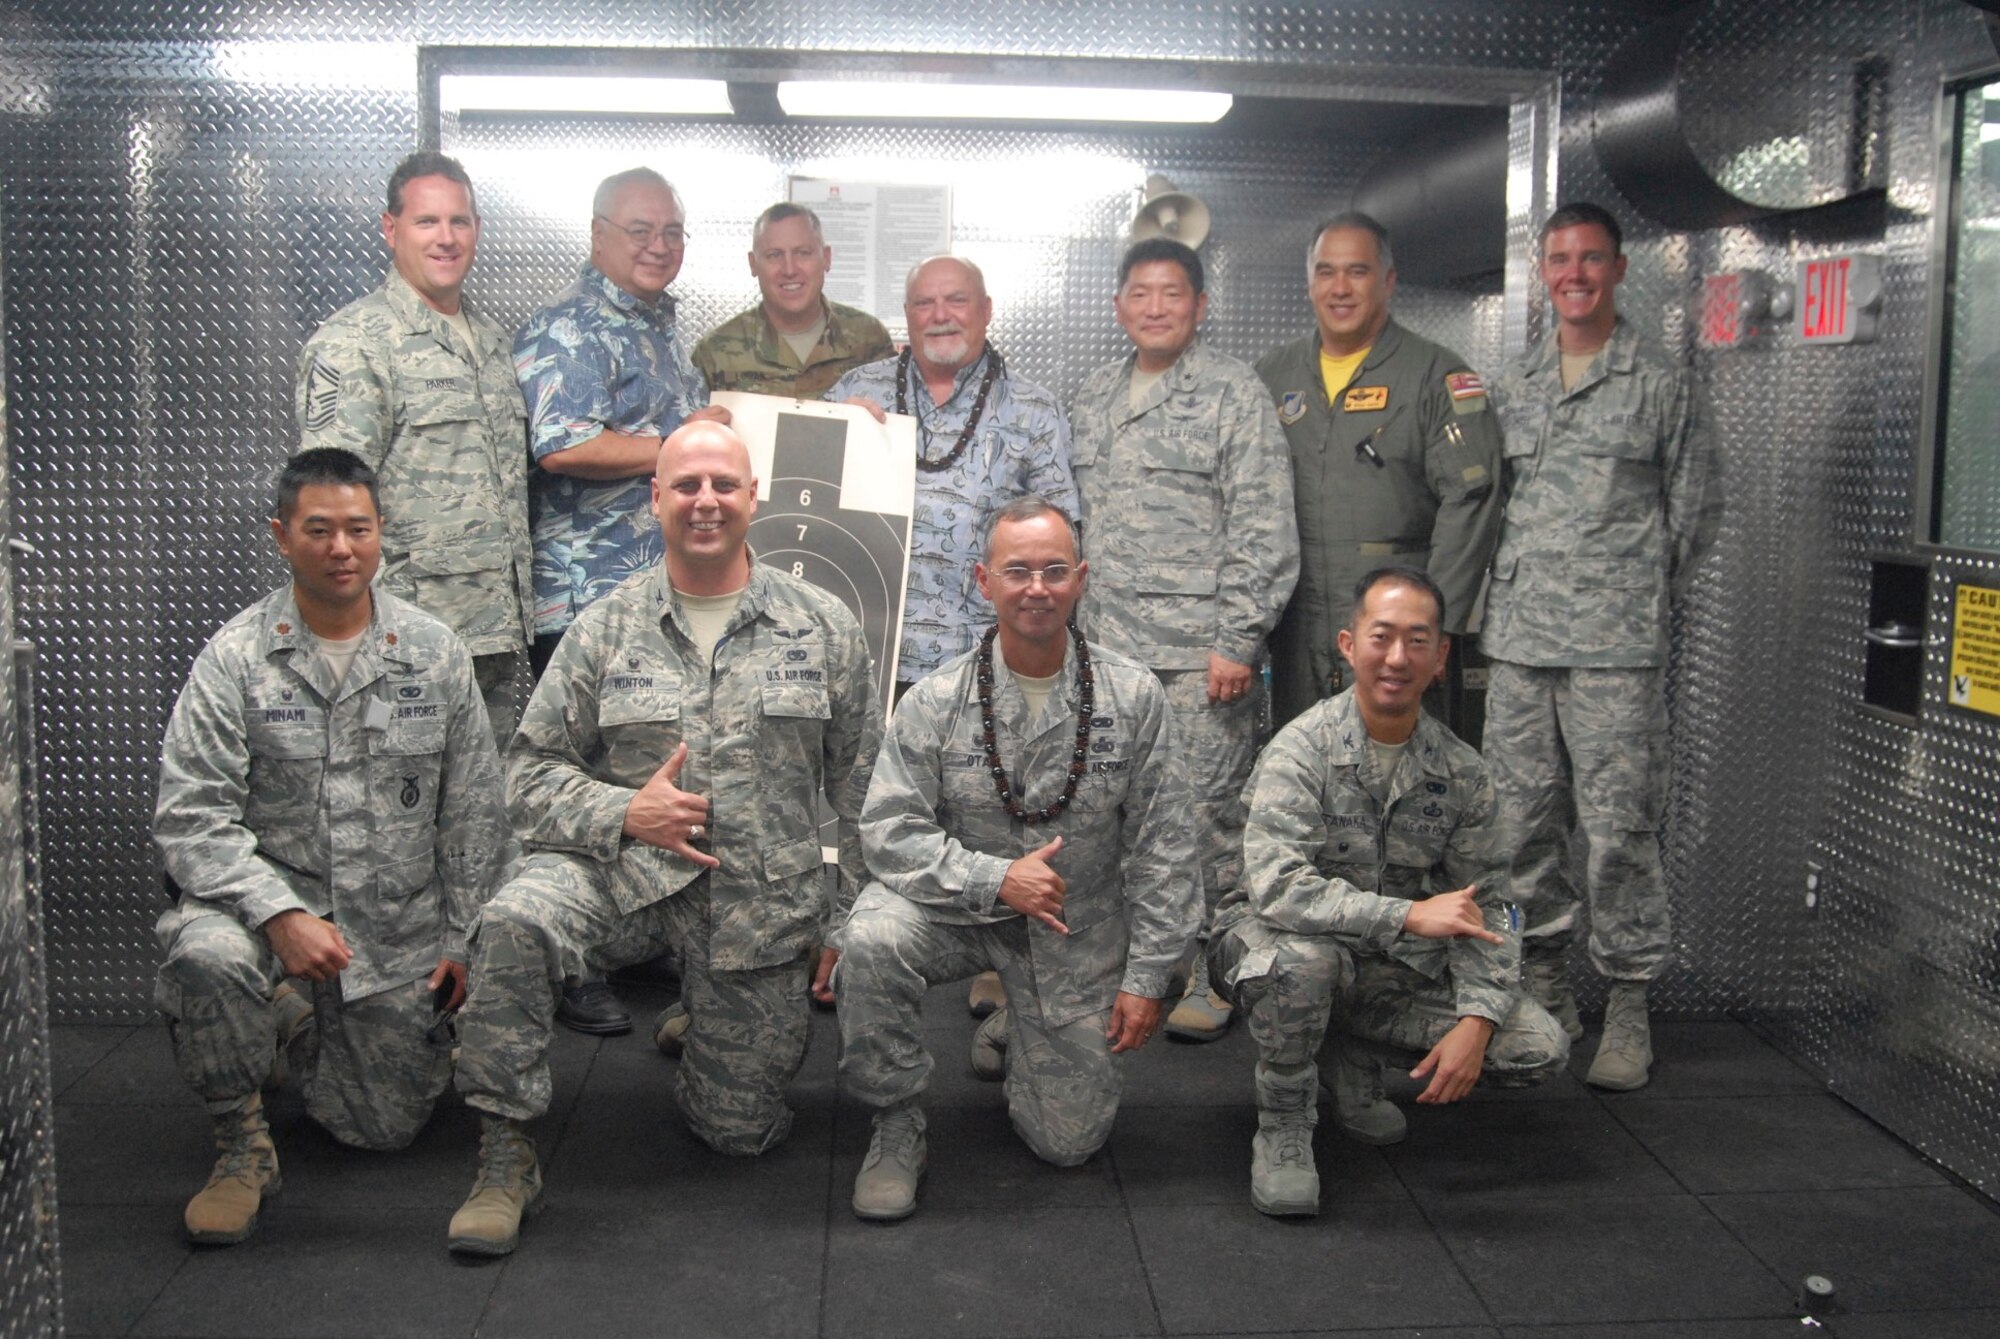 U.S. military service members participate in an ad hoc shooting competition after the blessing of the 154th Security Force Squadron Indoor Firing Range at Joint Base Pearl Harbor-Hickam, Hawaii, Aug. 8, 2015. Retired Brig. Gen. Edwin "Skip" Vincent, former commander of the Hawaii National Guard, took first place and returned Brig. Gen. Stan Osserman, also a former commander of the Hawaii Air National Guard, took second place in the competition. (U.S. Air National Guard photo by Airman 1st Class Robert Cabuco)